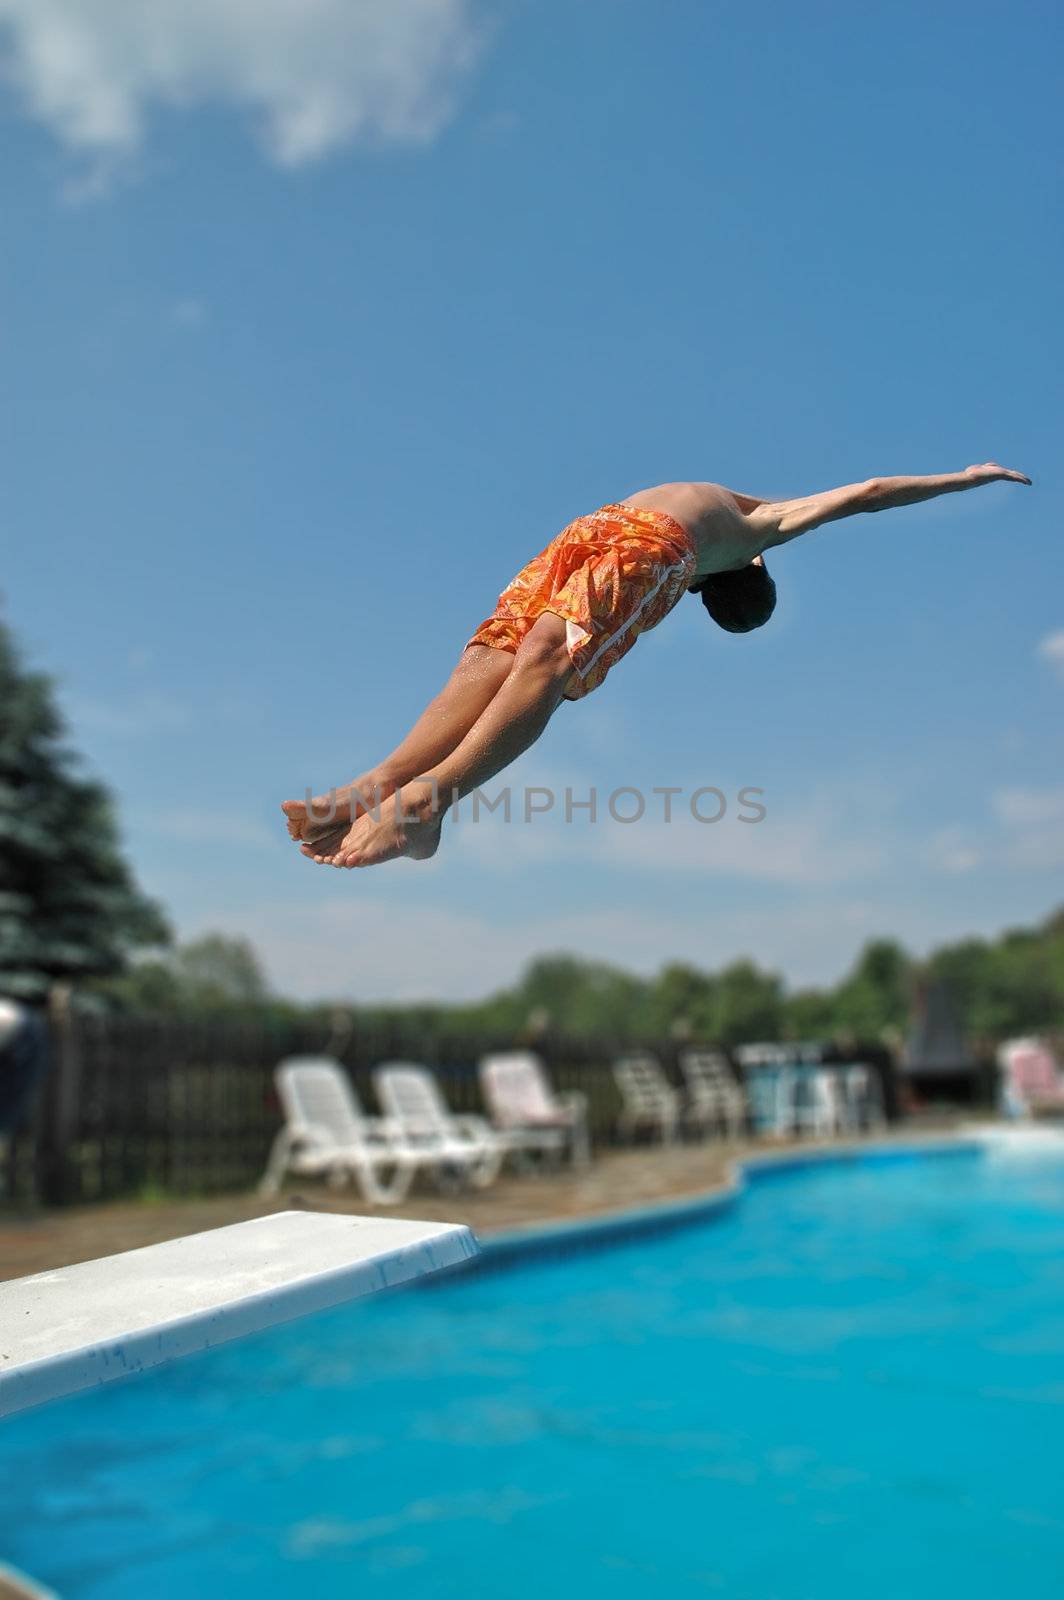 A boy does a dive off of a diving board at a home swimming pool of blue water.